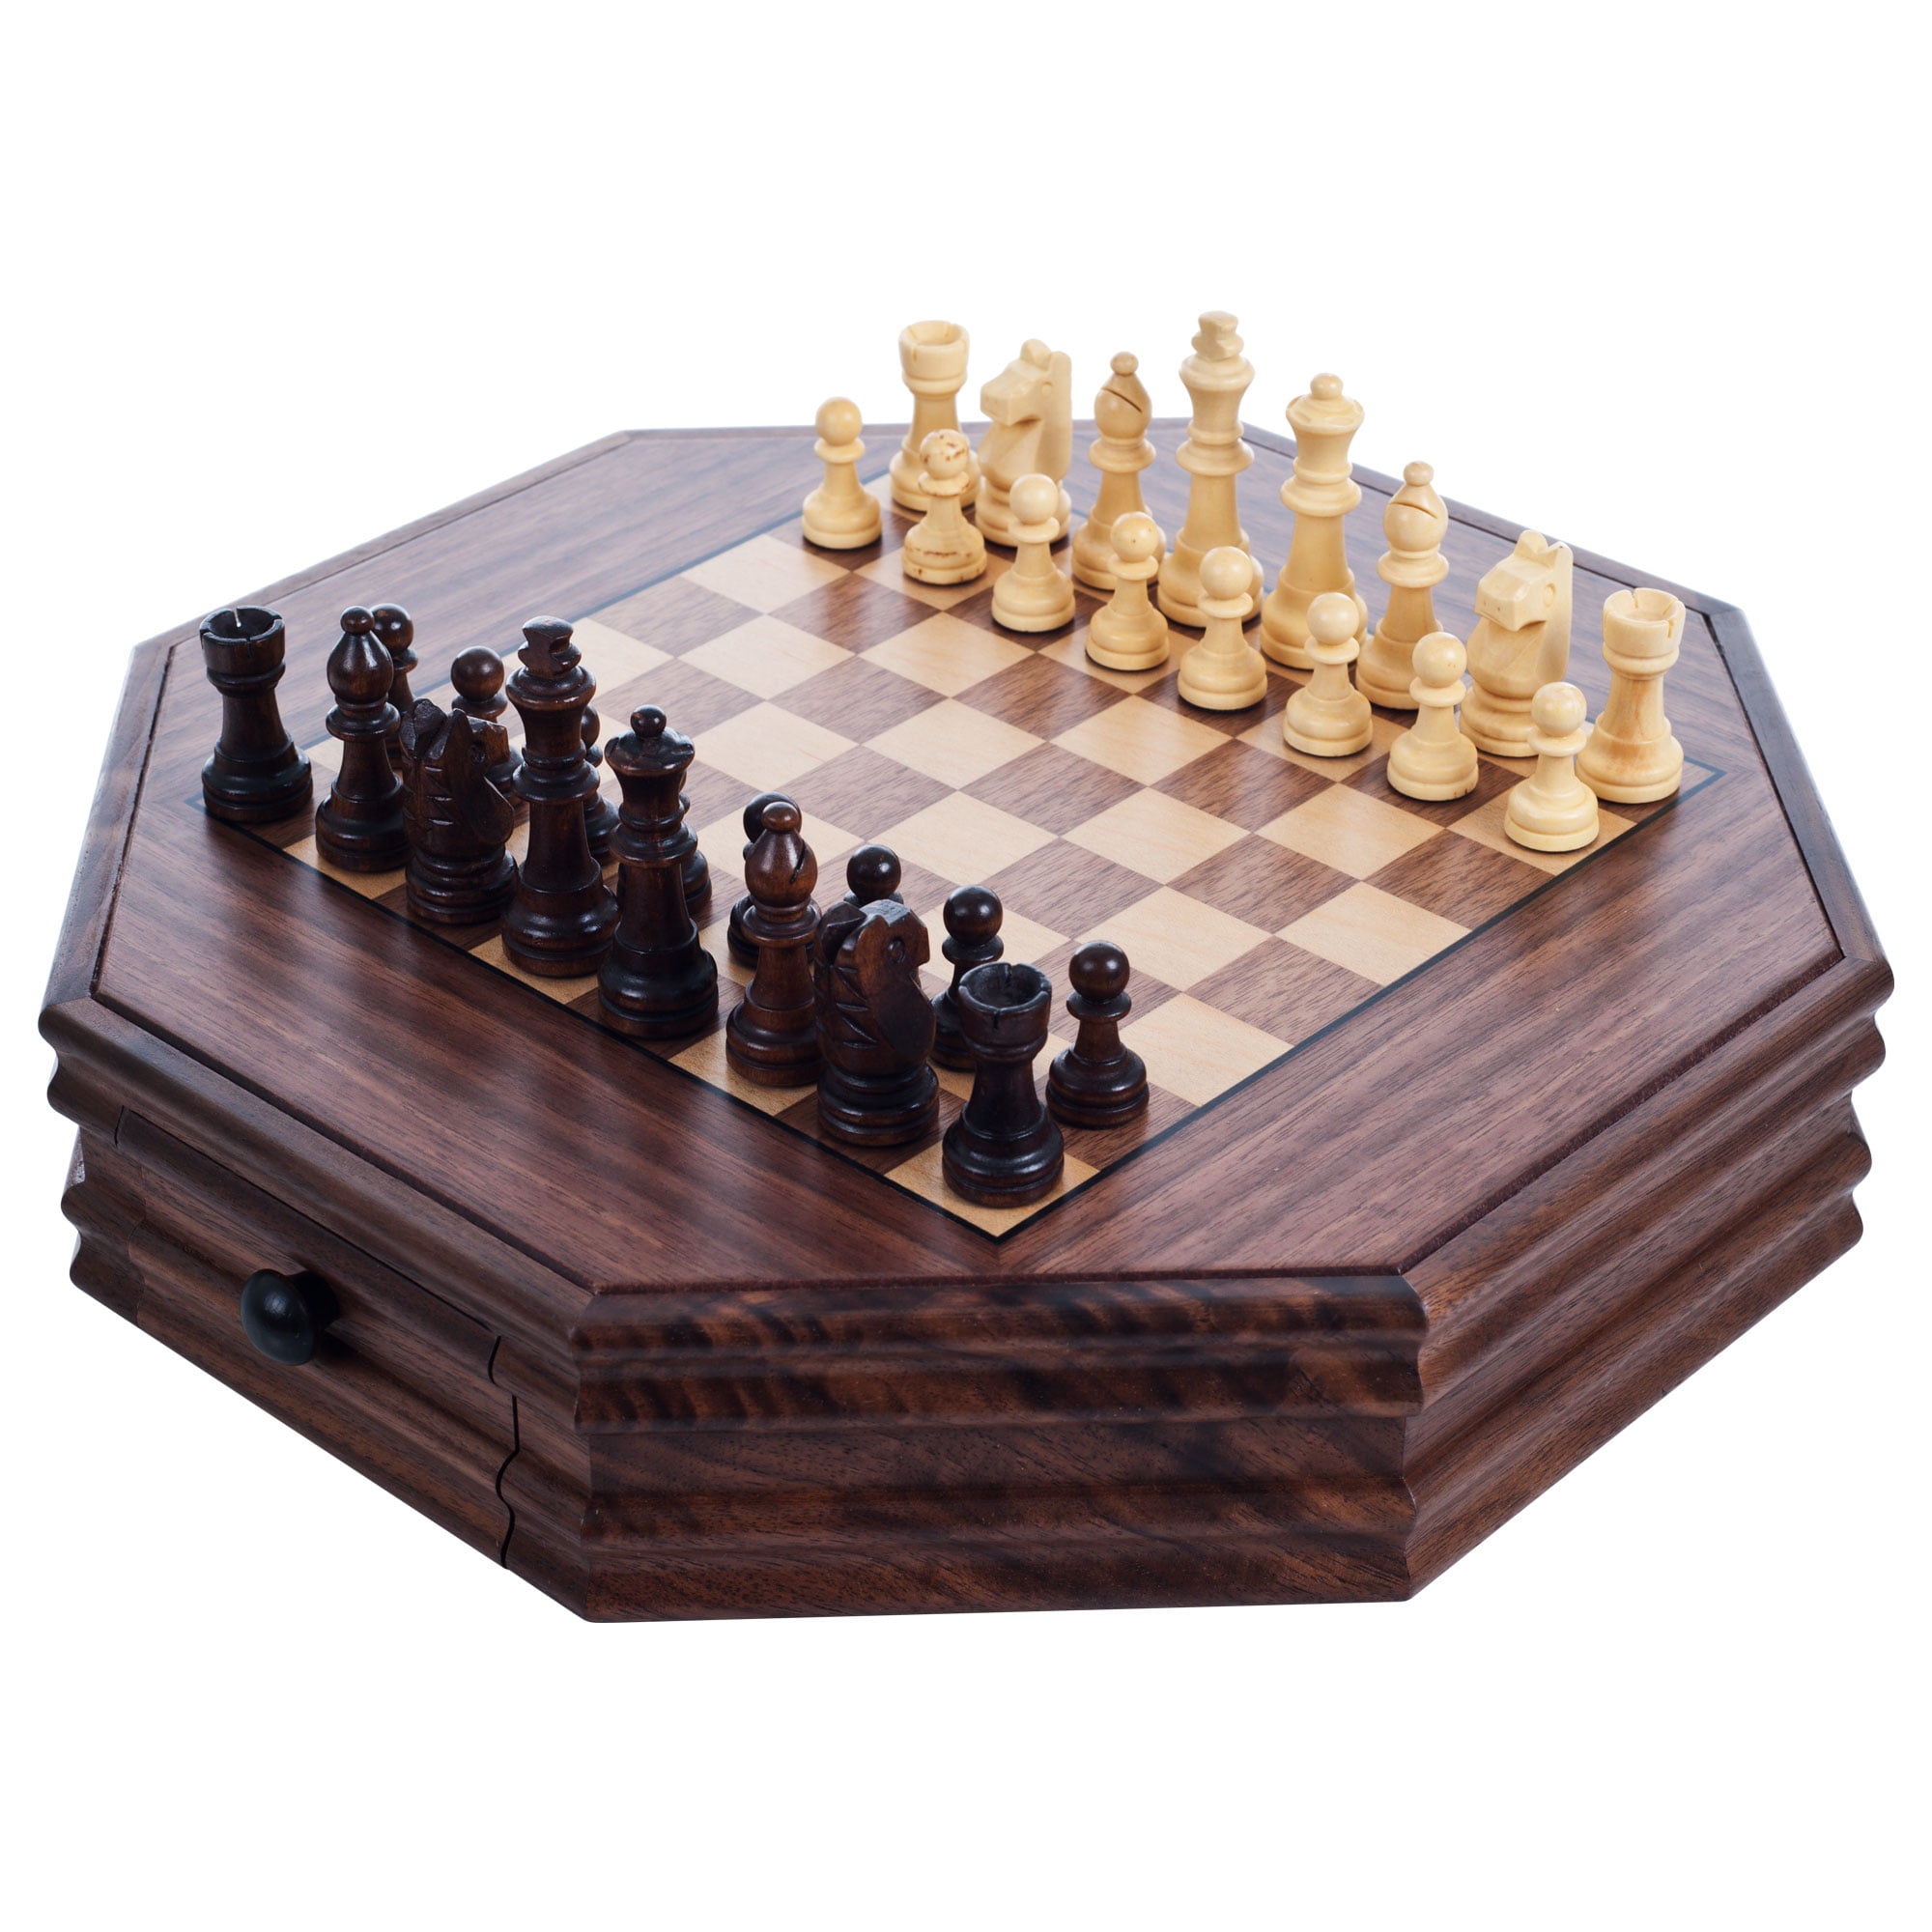 Classic Games Collection Inlaid Wood Chess Set With 3